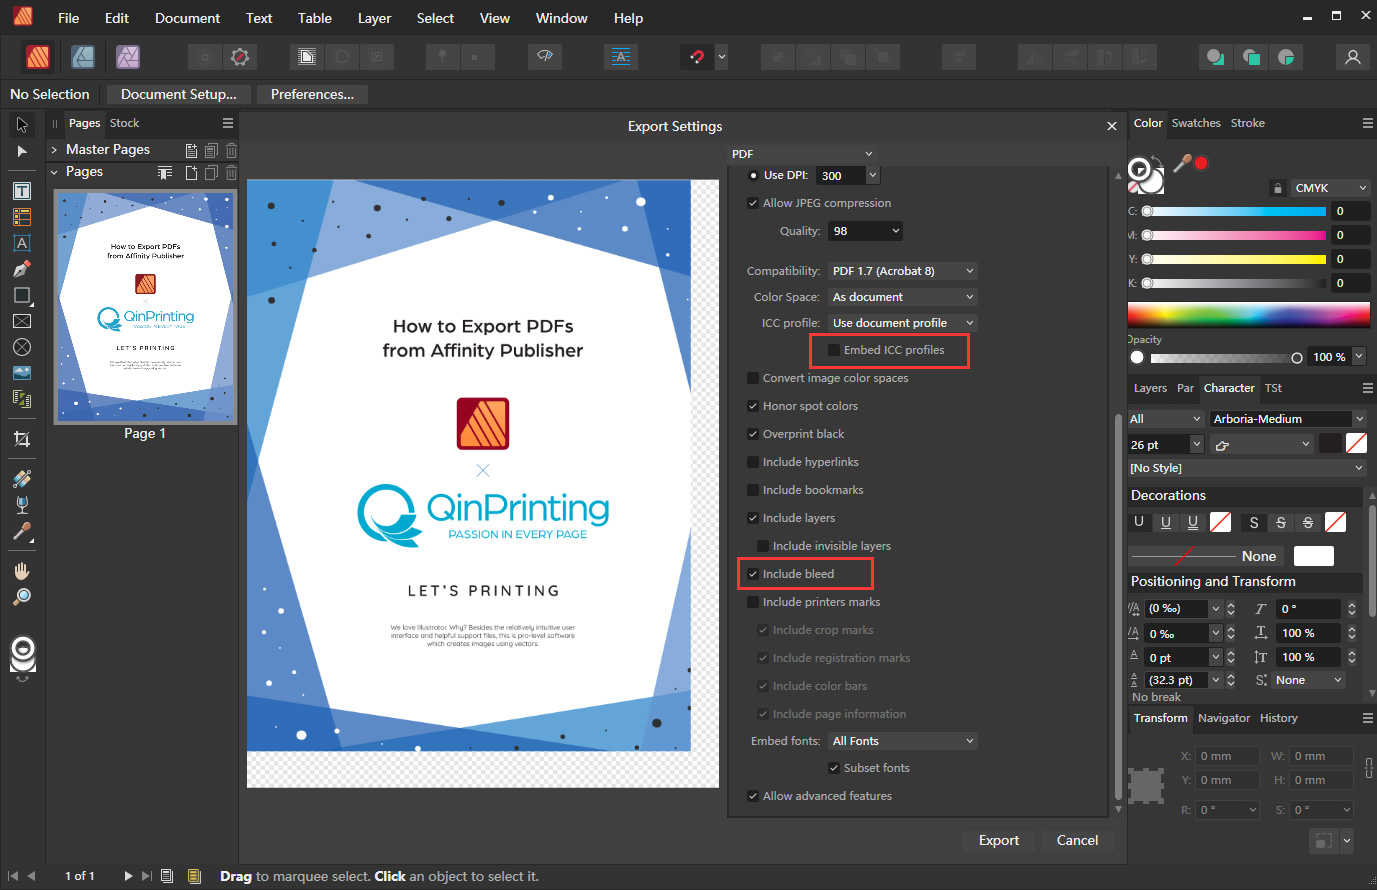 How to Export PDFs from Affinity Publisher Step 3